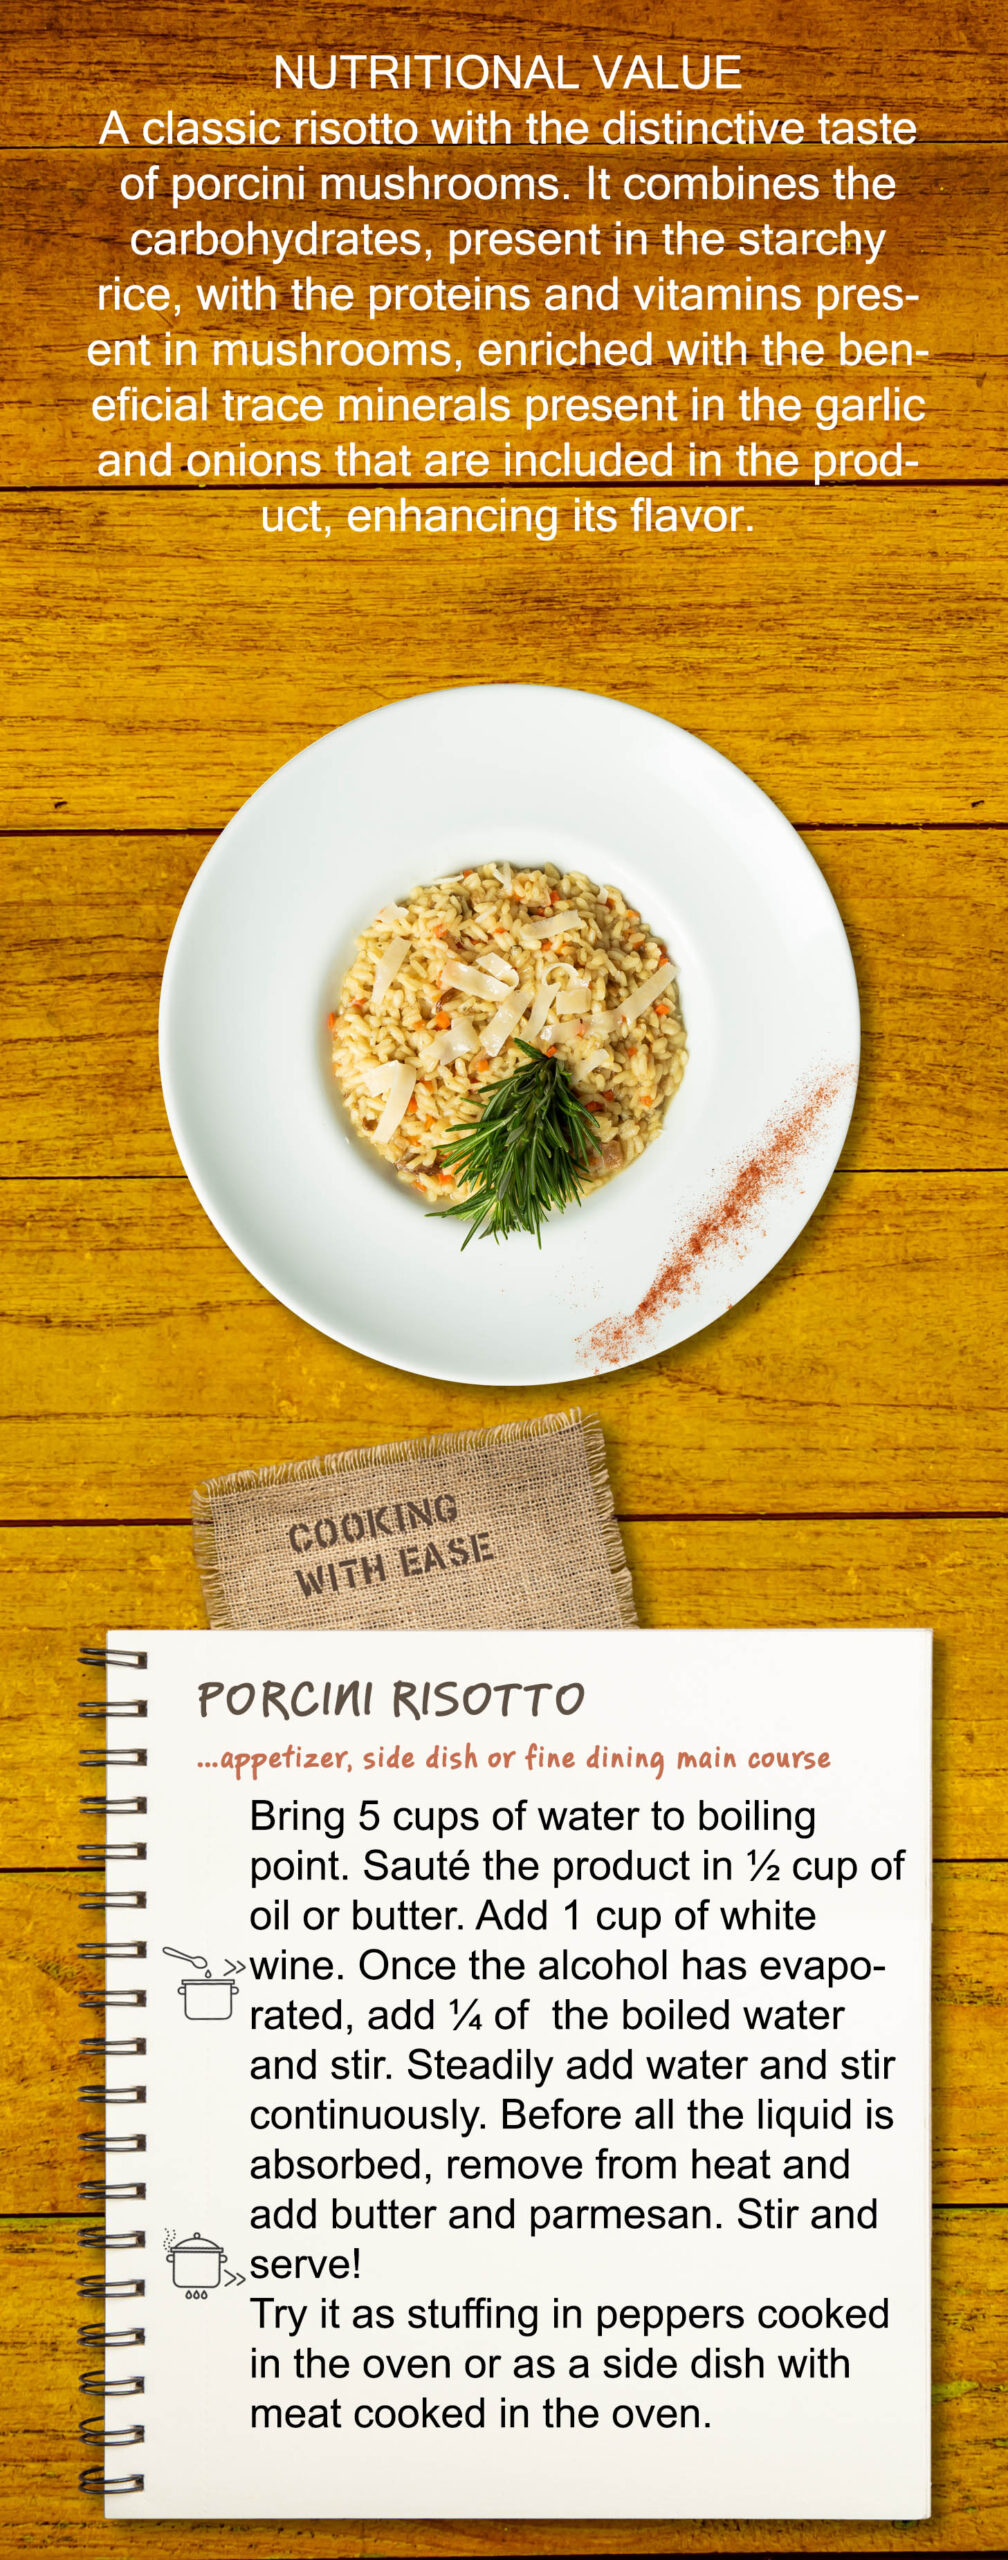 A classic risotto with the distinctive taste of porcini mushrooms. It combines the carbohydrates, present in the starchy rice, with the proteins and vitamins present in mushrooms, enriched with the beneficial trace minerals present in the garlic and onions that are included in the product, enhancing its flavor. Easy to Cook Bring 5 cups of water to boiling point. Sauté the product in ½ cup of oil or butter. Add 1 cup of white wine. Once the alcohol has evaporated, add ¼ of the boiled water and stir. Steadily add water and stir continuously. Before all the liquid is absorbed, remove from heat and add butter and parmesan. Stir and serve! Try it as stuffing in peppers cooked in the oven or as a side dish with meat cooked in the oven.